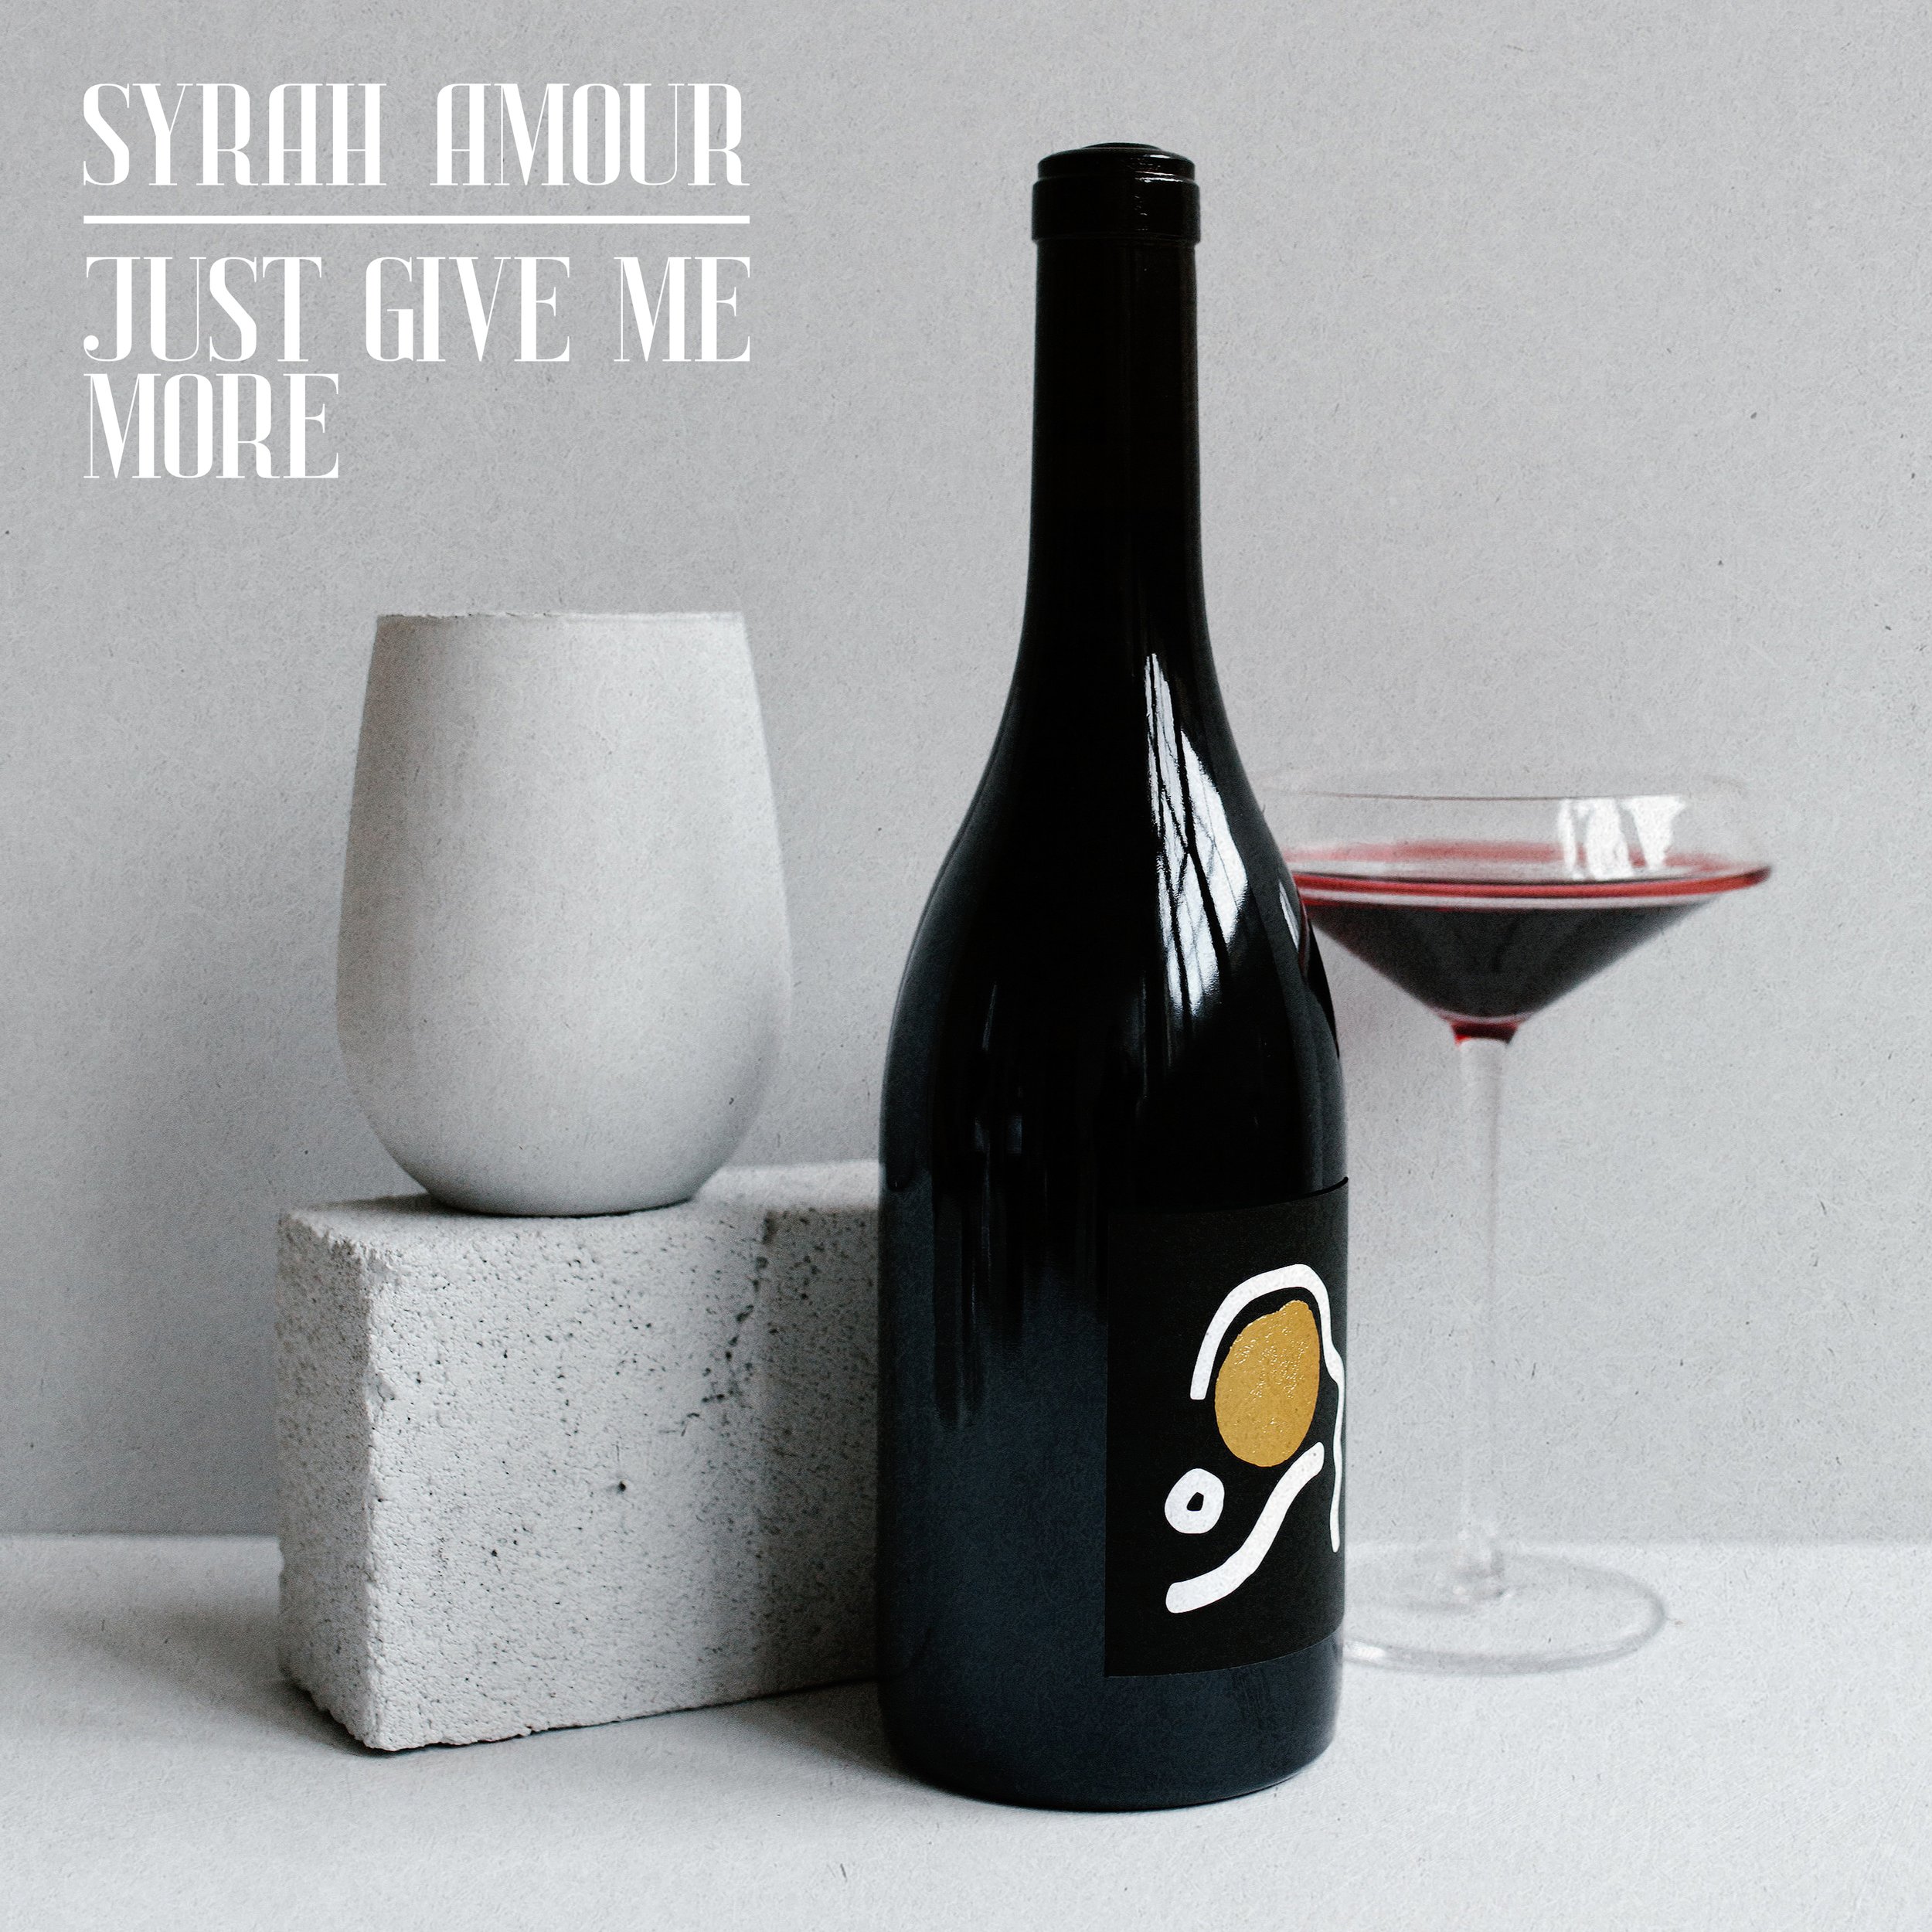 Syrah Amour - Just Give Me More - Artwork (1) (1).jpg